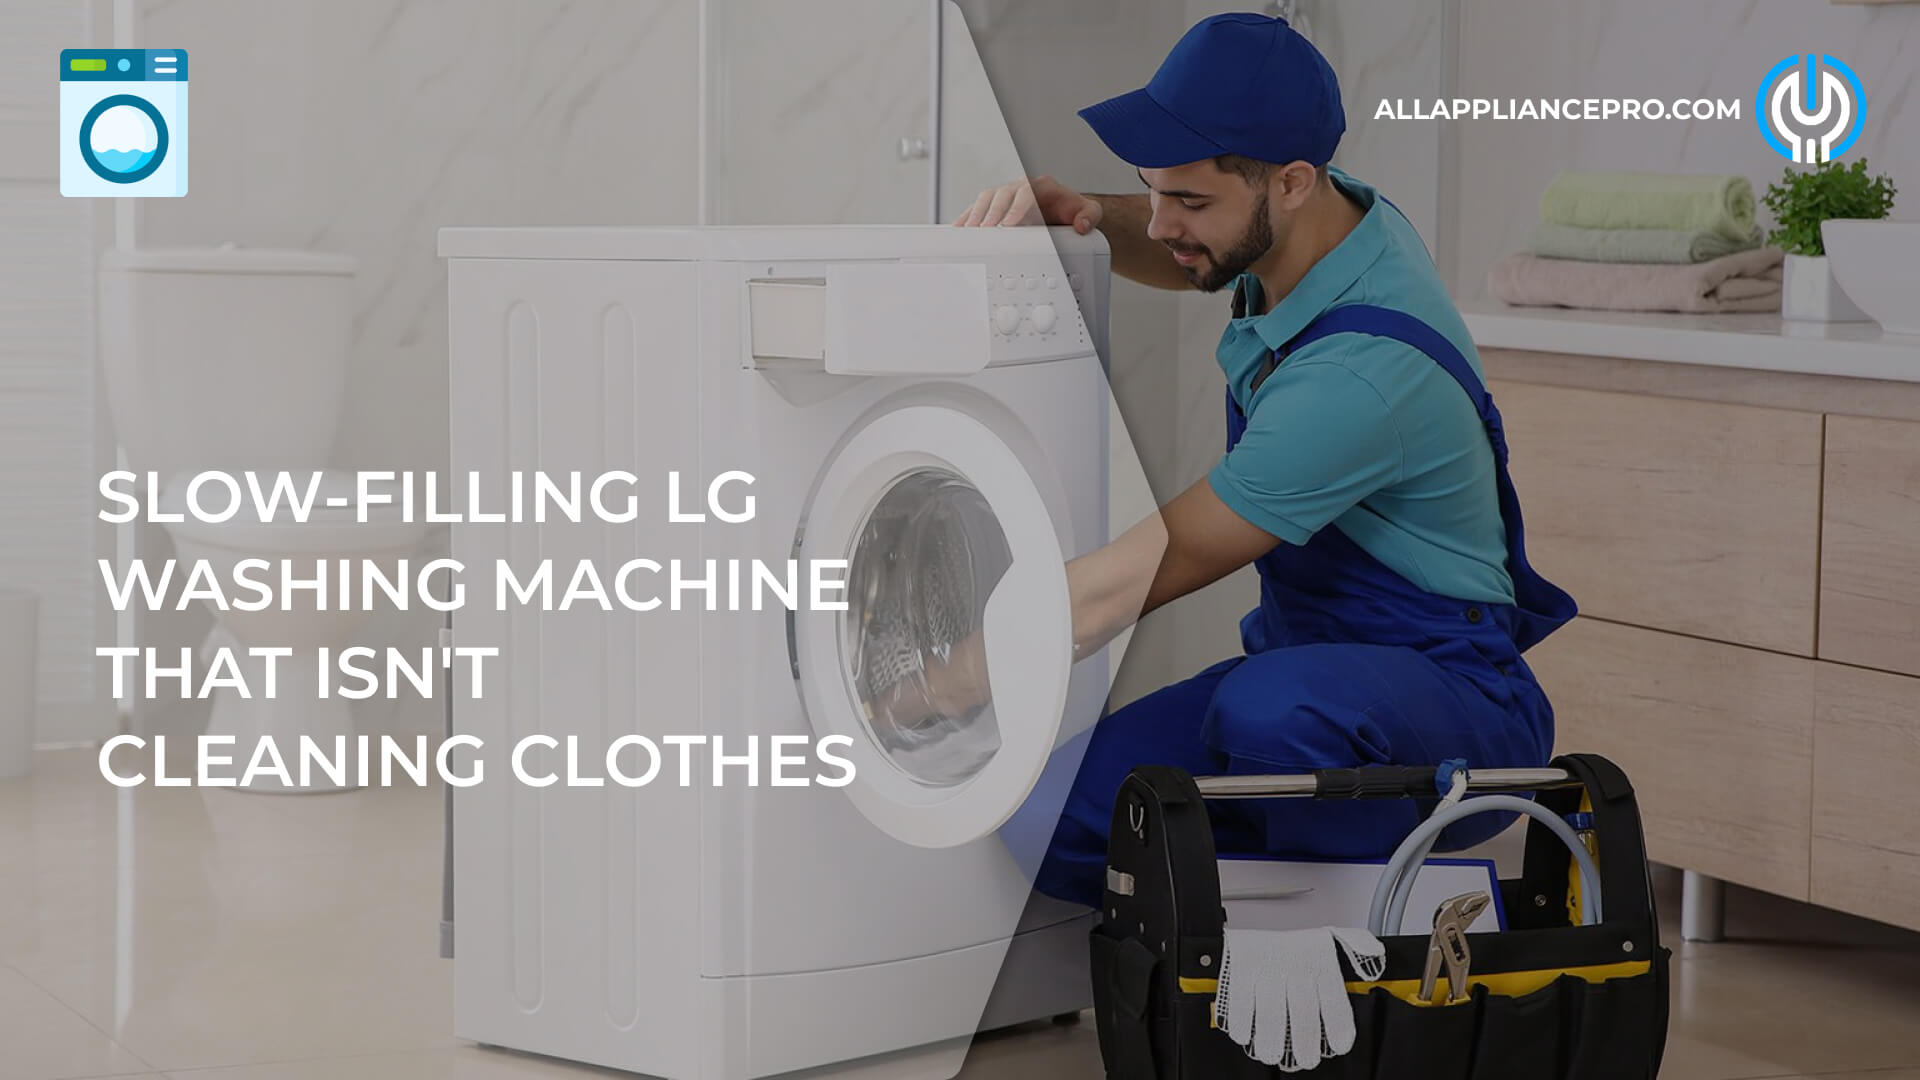 Slow-Filling LG Washing Machine That Isn't Cleaning Clothes